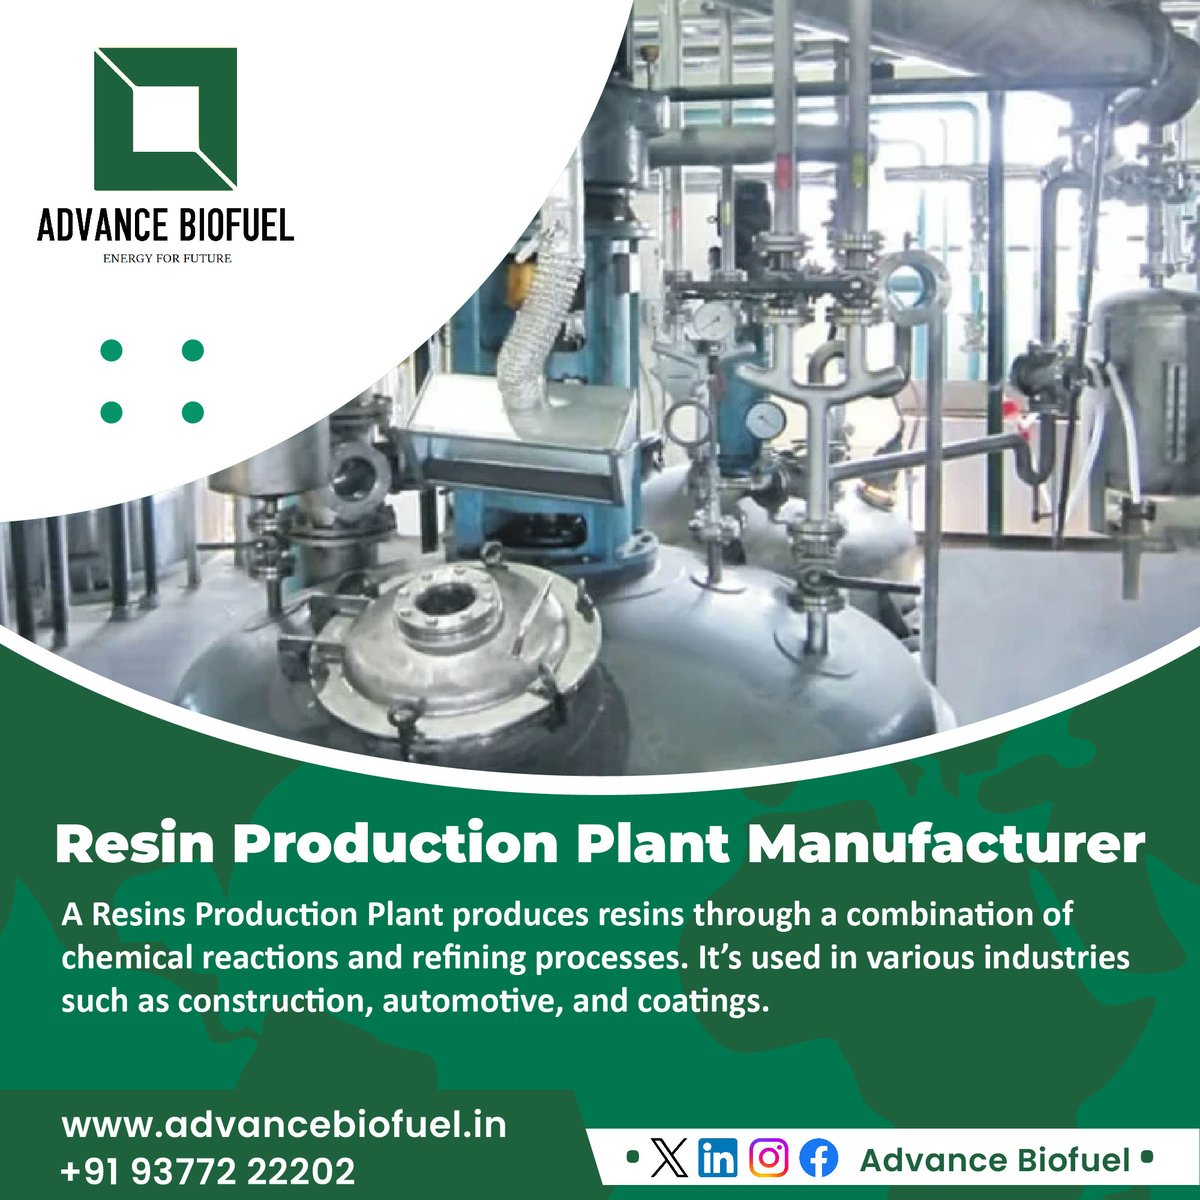 A Resins Production Plant produces resins through a combination of chemical reactions and refining processes.

#AdvancedBiofuel #ResinProduction #Manufacturing #IndustrialSolutions #ChemicalIndustry #PlantEngineering #PolymerManufacturing #ResinManufacturer #InnovationInIndustry